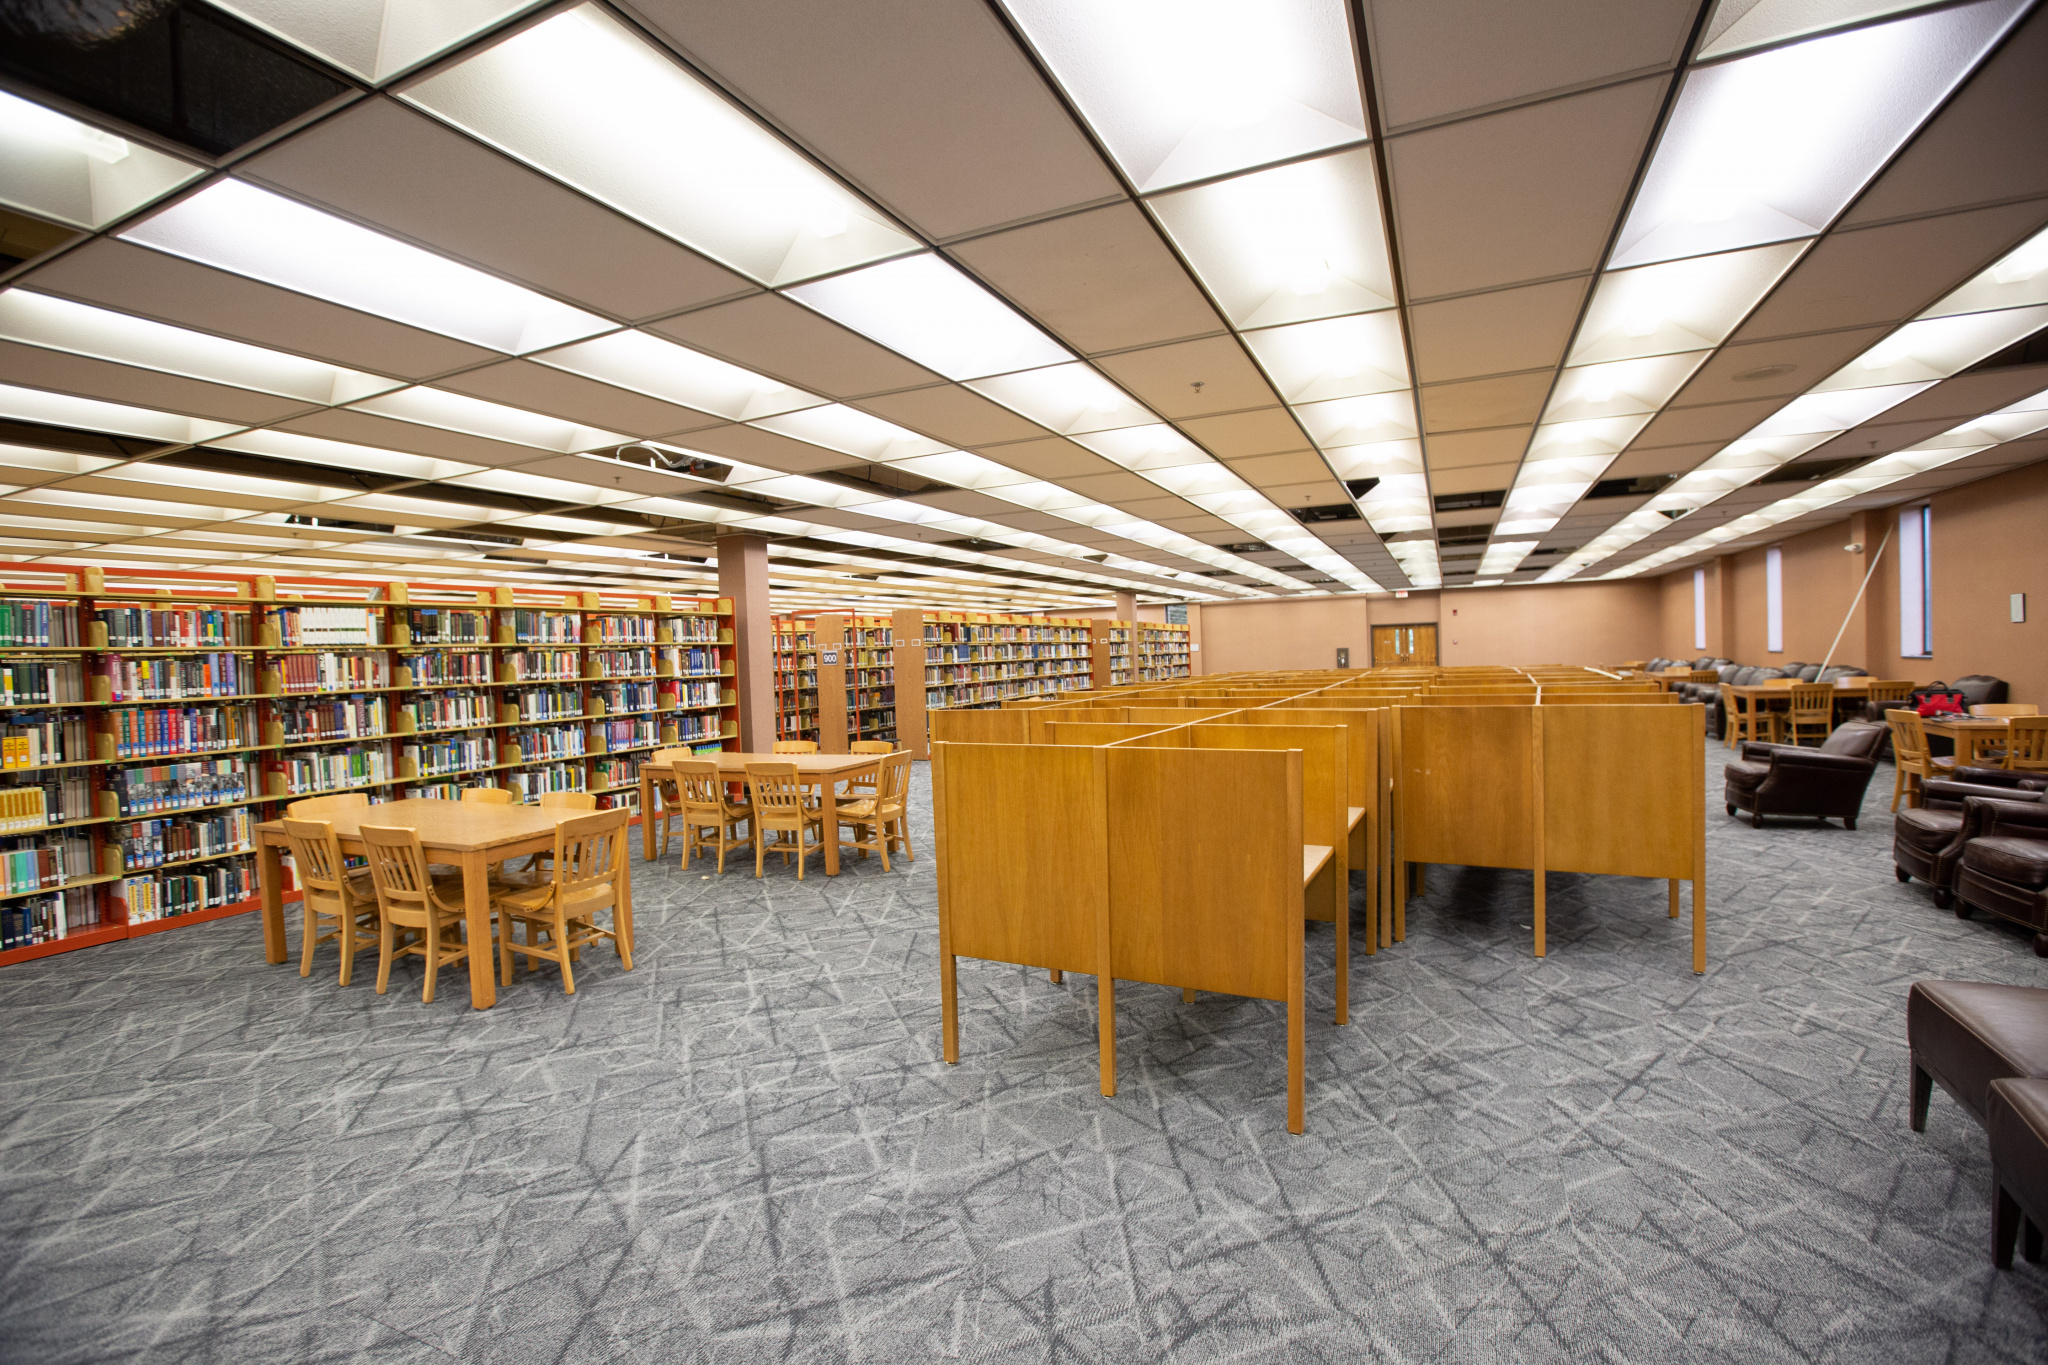 The new library space has updated carpet and furniture (Photo by David Ruiz)